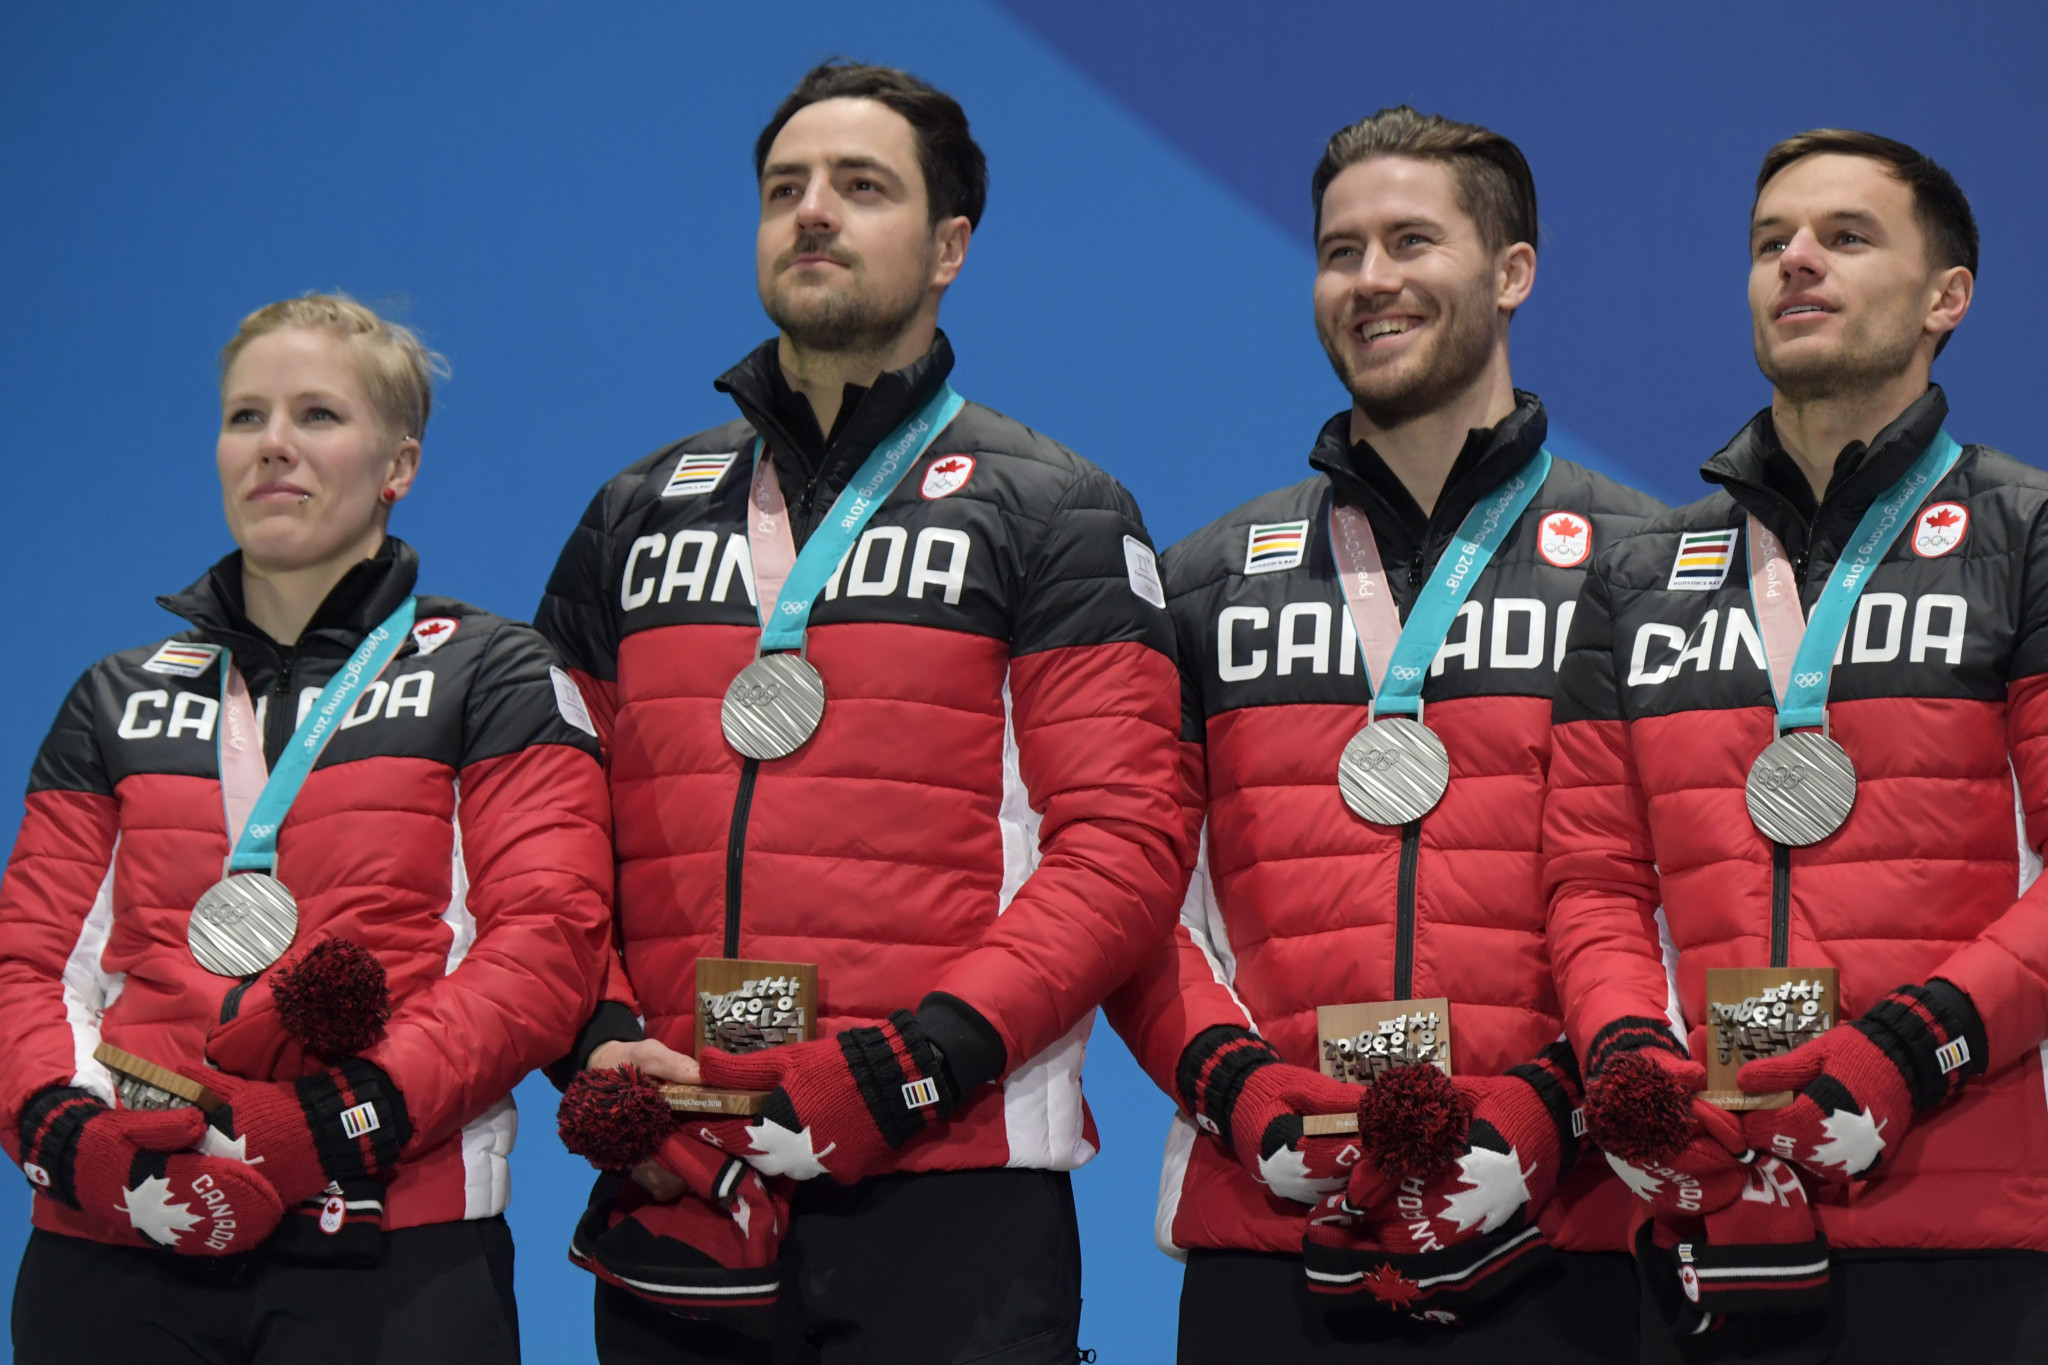 Canada's silver medallists Alex Gough, Sam Edney, Tristan Walker and Justin Snith pose on the podium during the medal ceremony at Pyeongchang 2018 ©Getty Images